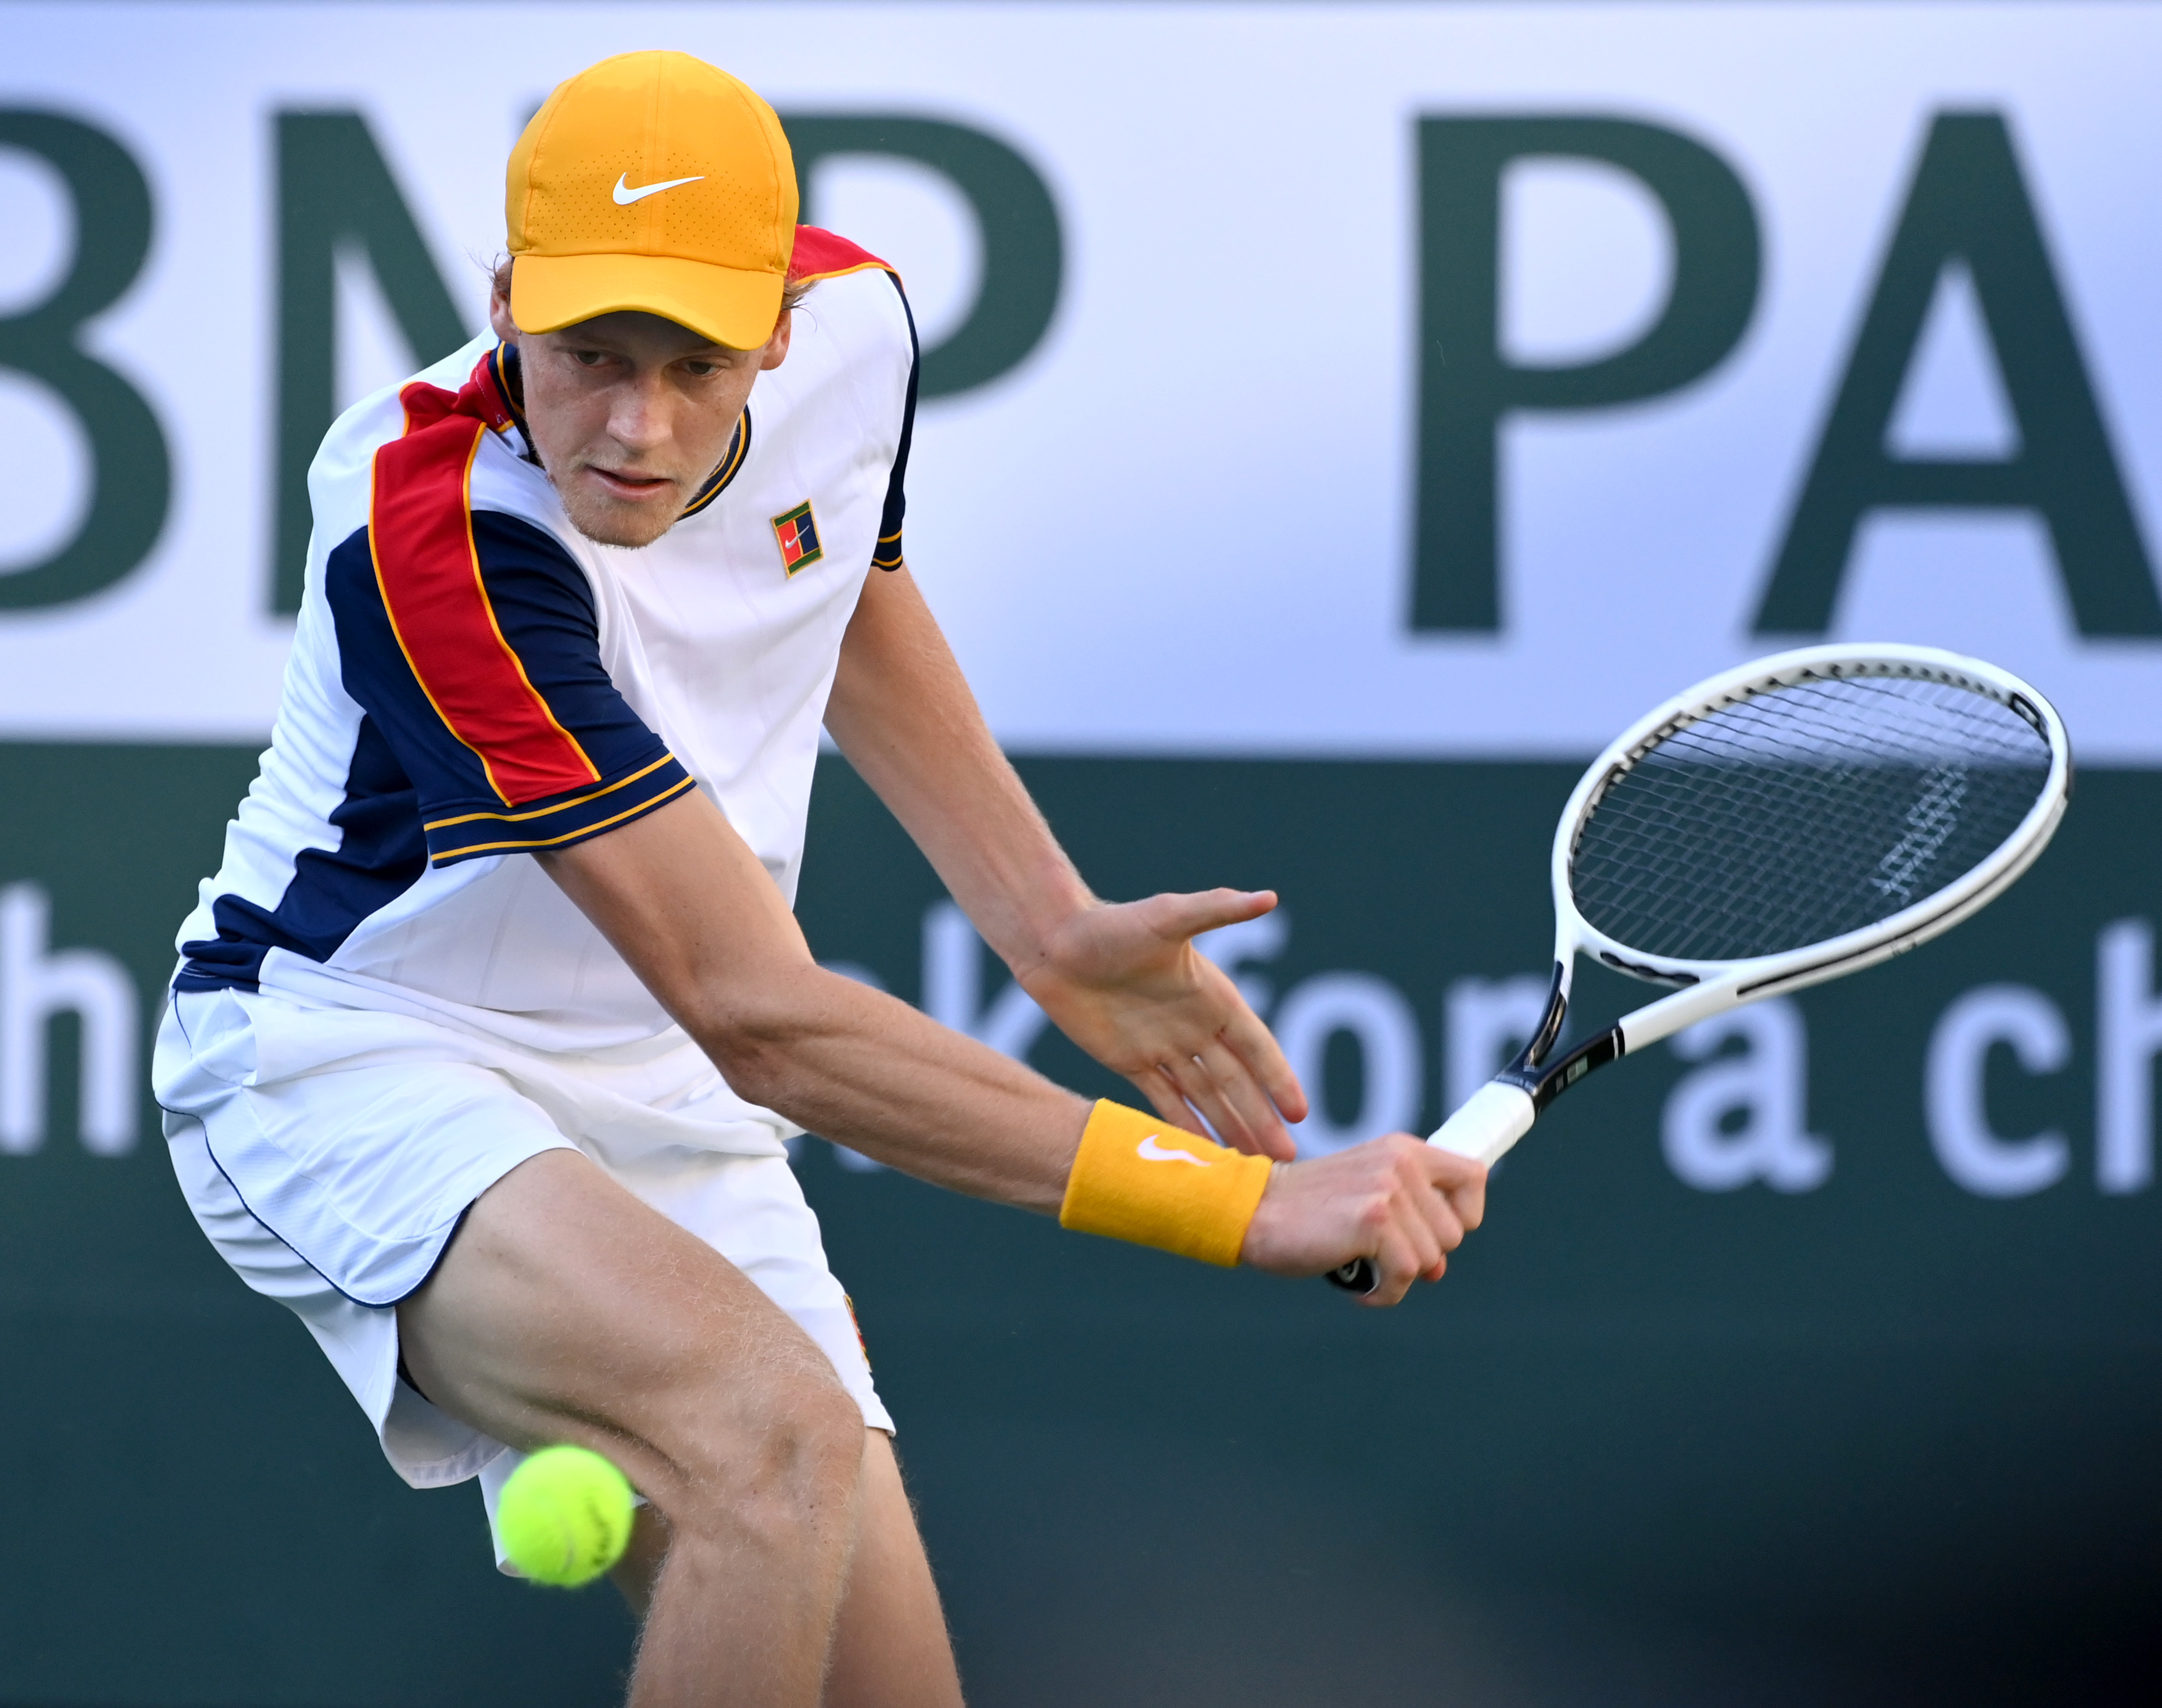 Oct 13, 2021; Indian Wells, CA, USA; Jannik Sinner (ITA) hits a shot against Taylor Fritz (USA) in their fourth round match during the BNP Paribas Open at the Indian Wells Tennis Garden. Mandatory Credit: Jayne Kamin-Oncea-USA TODAY Sports